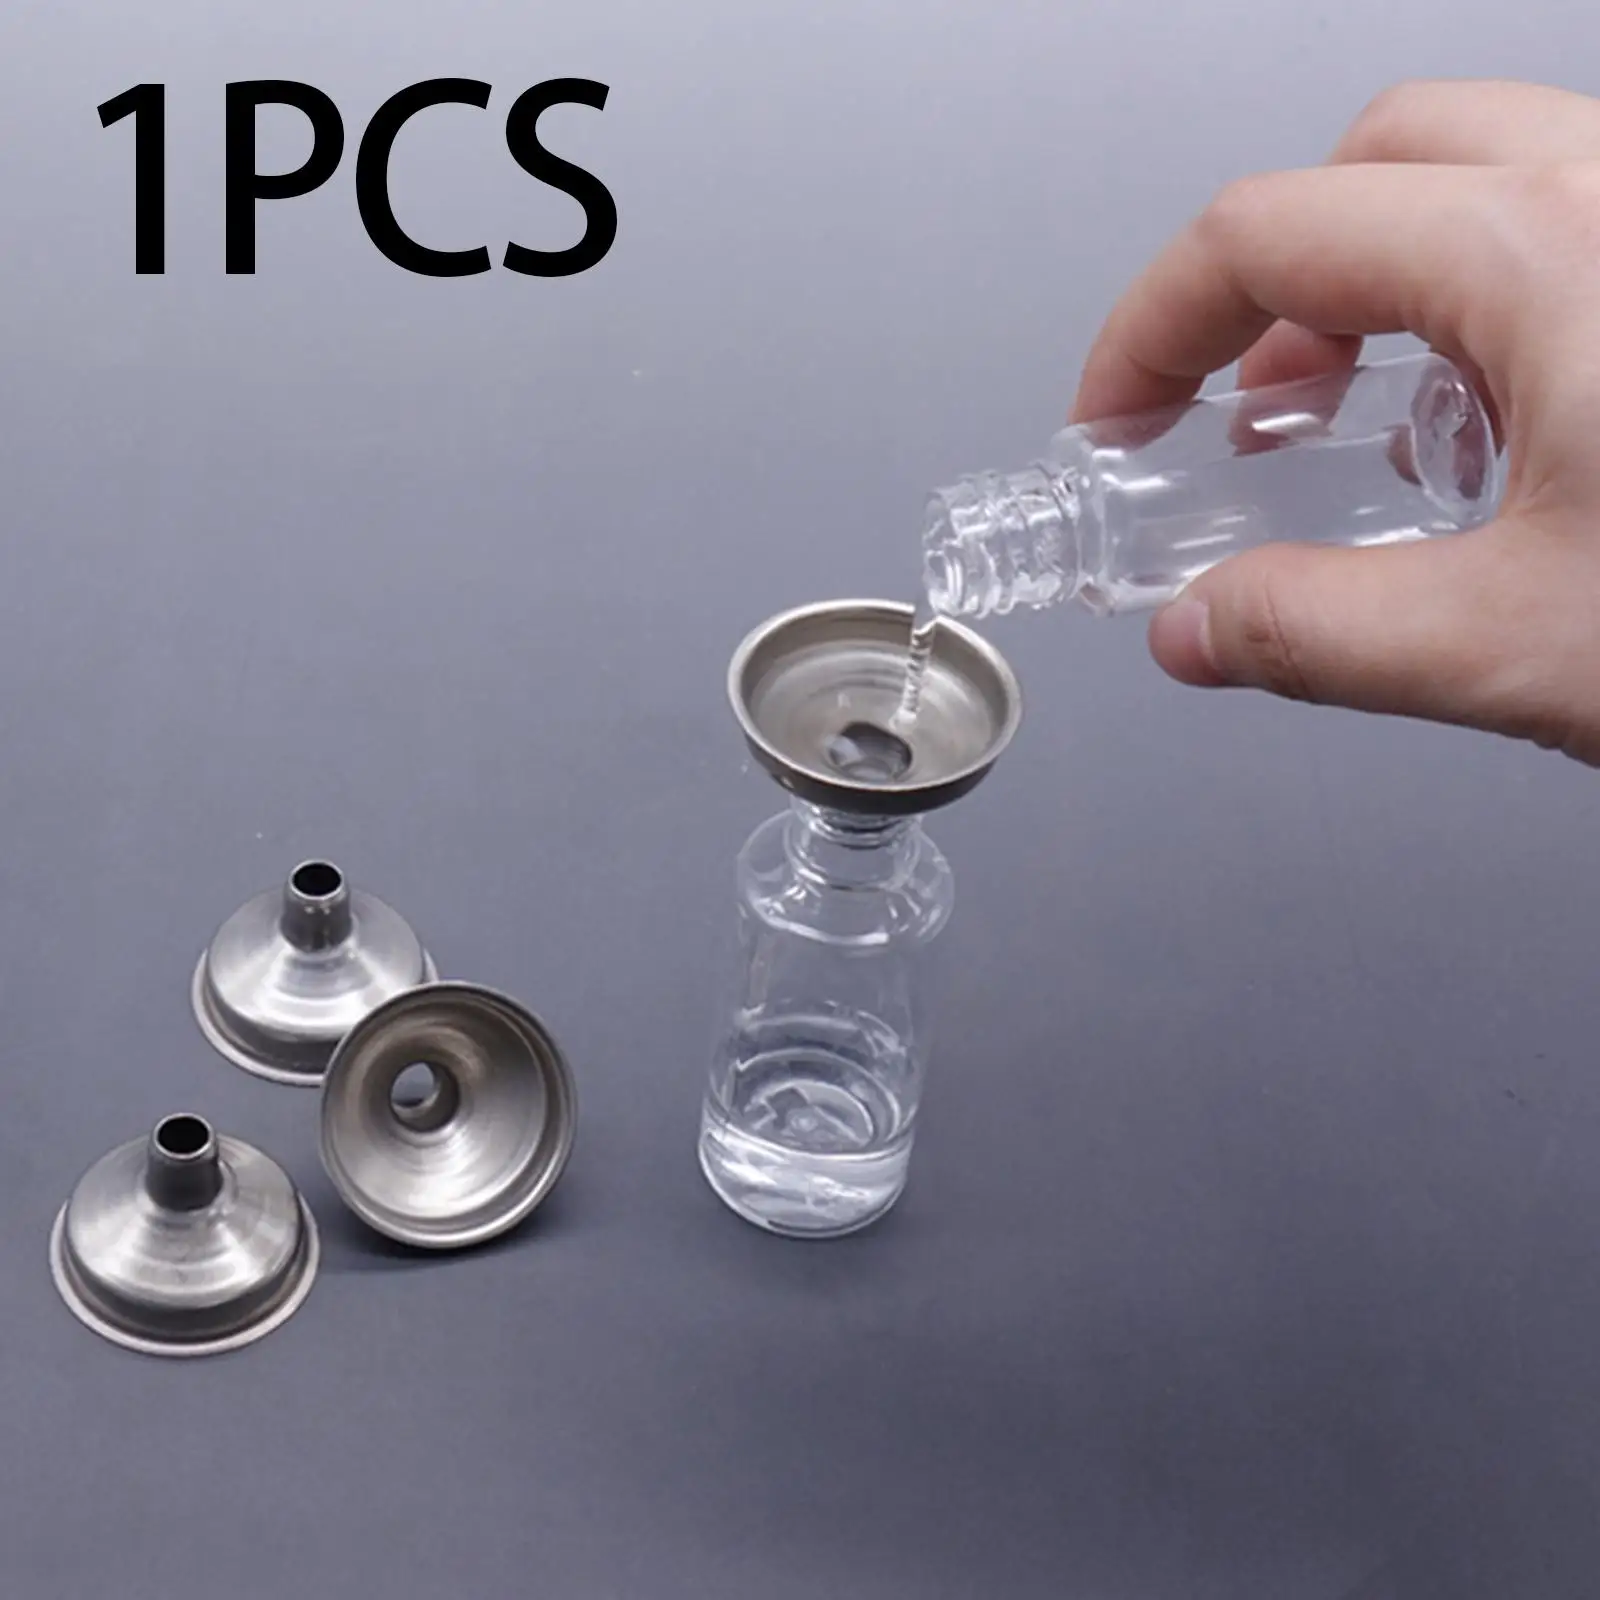 Stainless Steel Kitchen Funnels Mini Funnel Strainer Filter for Transferring Fluid Liquid Oil Powder and Dry Ingredients